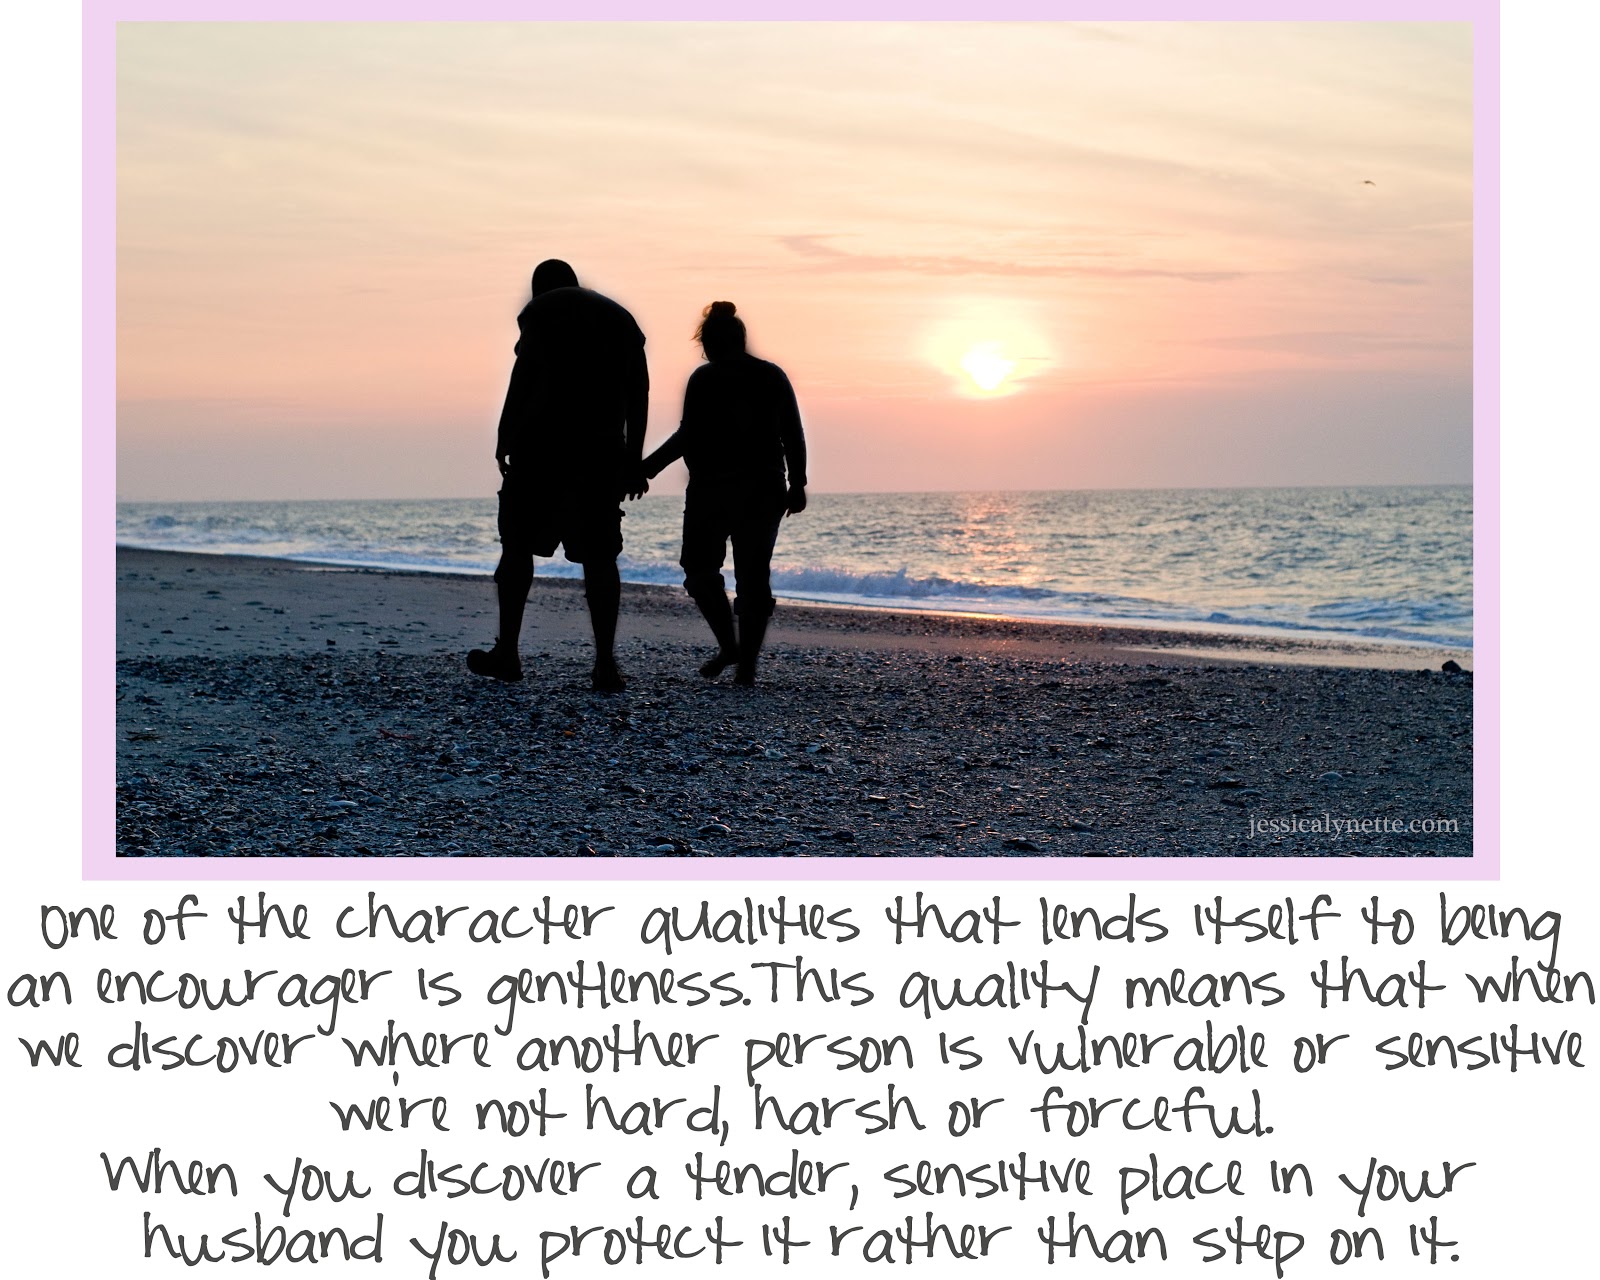 Friendship Quotes n Greetings: Marriage quote